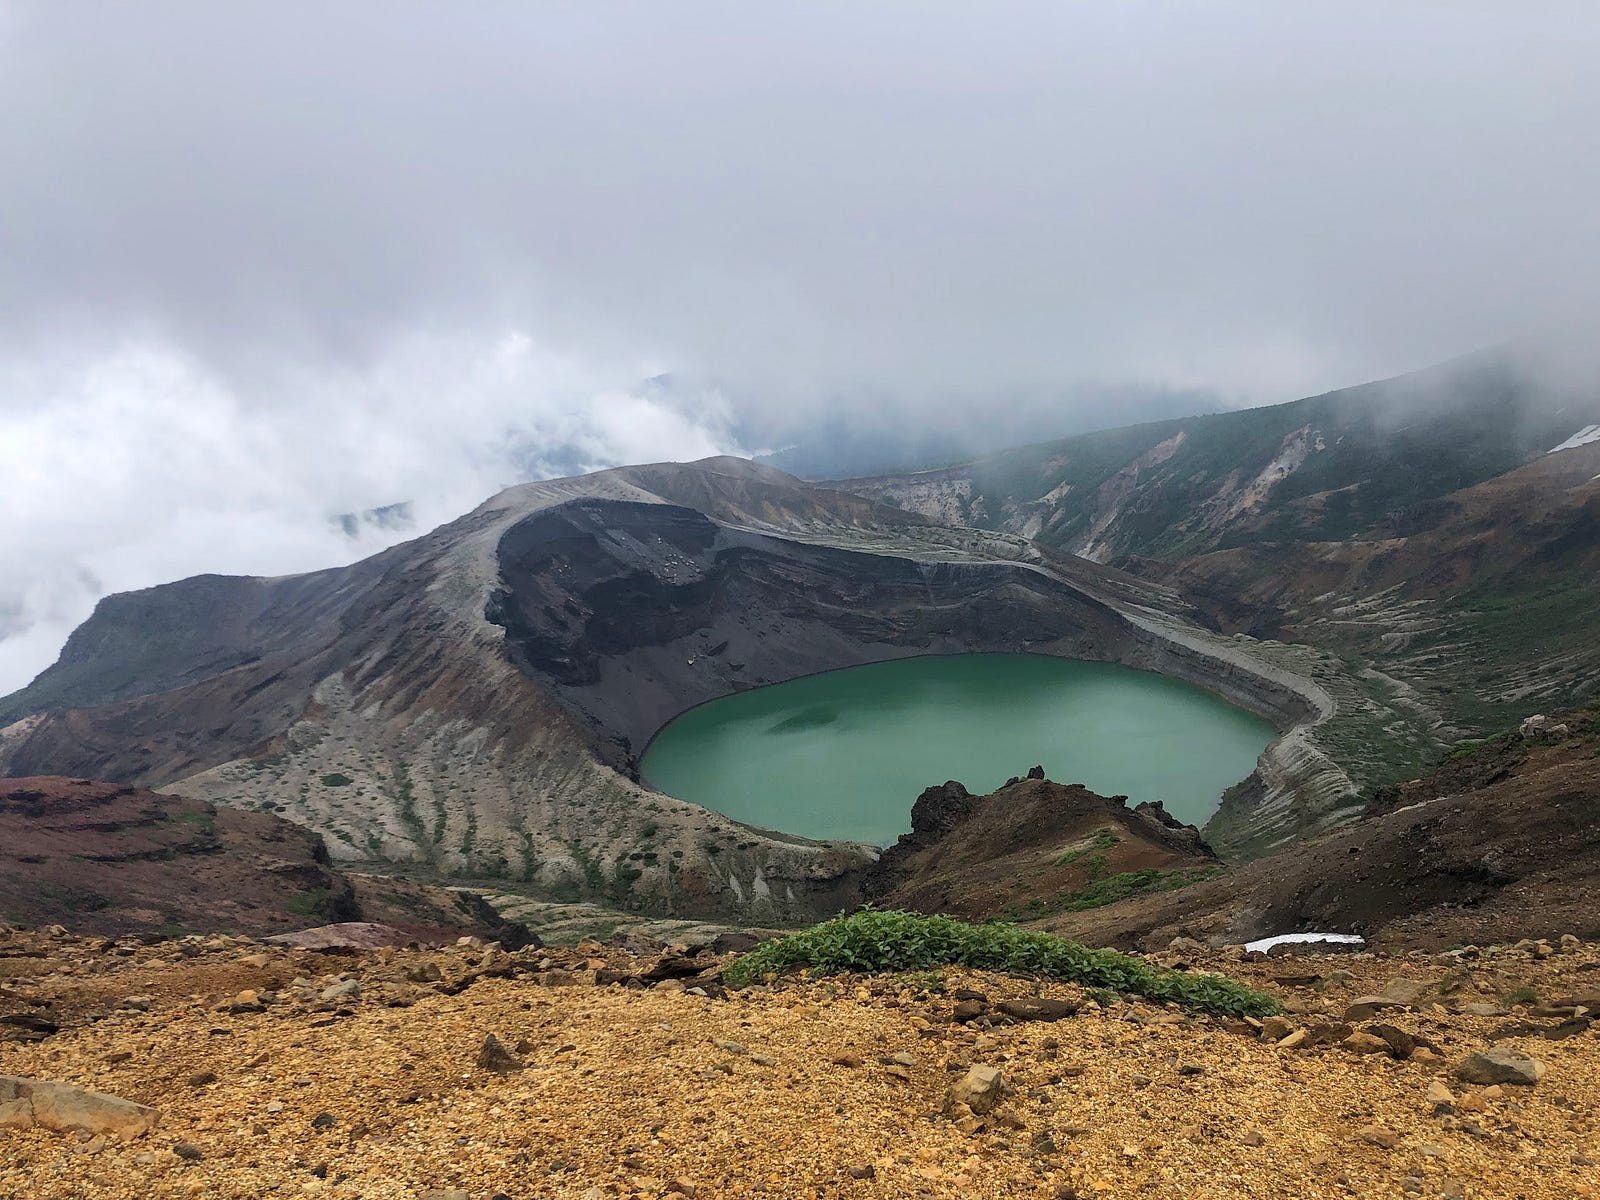 Zao-san’s emerald green crater lake in the middle of summer. Zao-san is one of the 100 Famous Mountains of Yamagata.